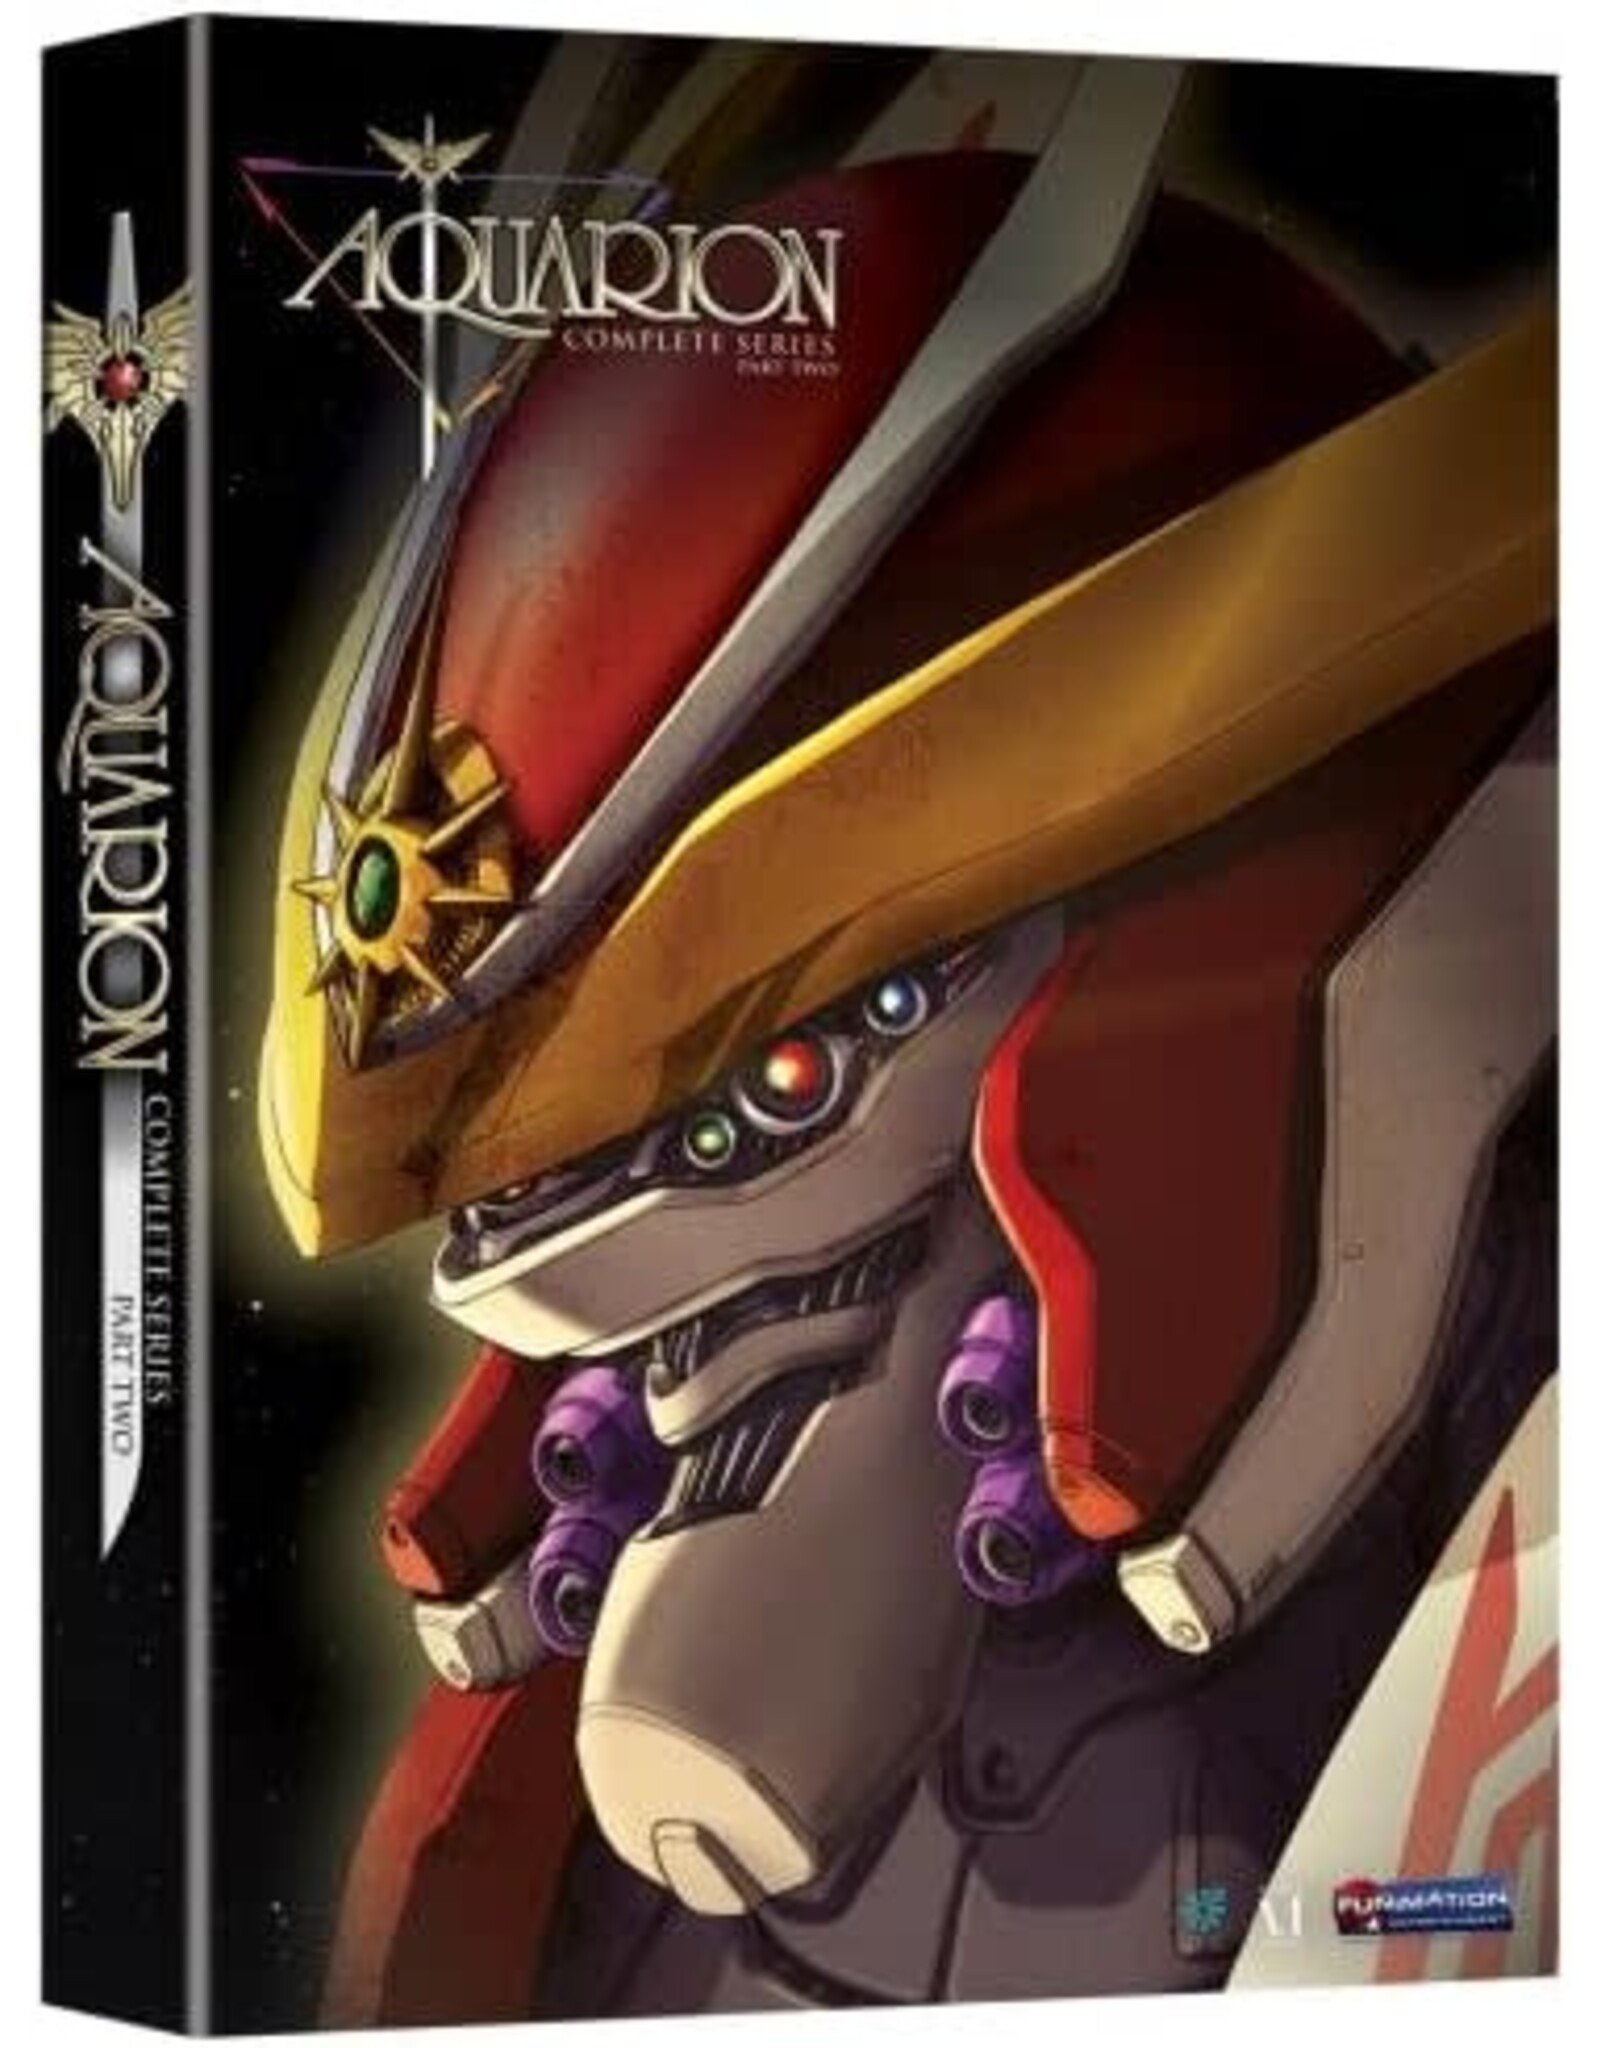 Anime & Animation Aquarion Complete Series Part 2 (Used)